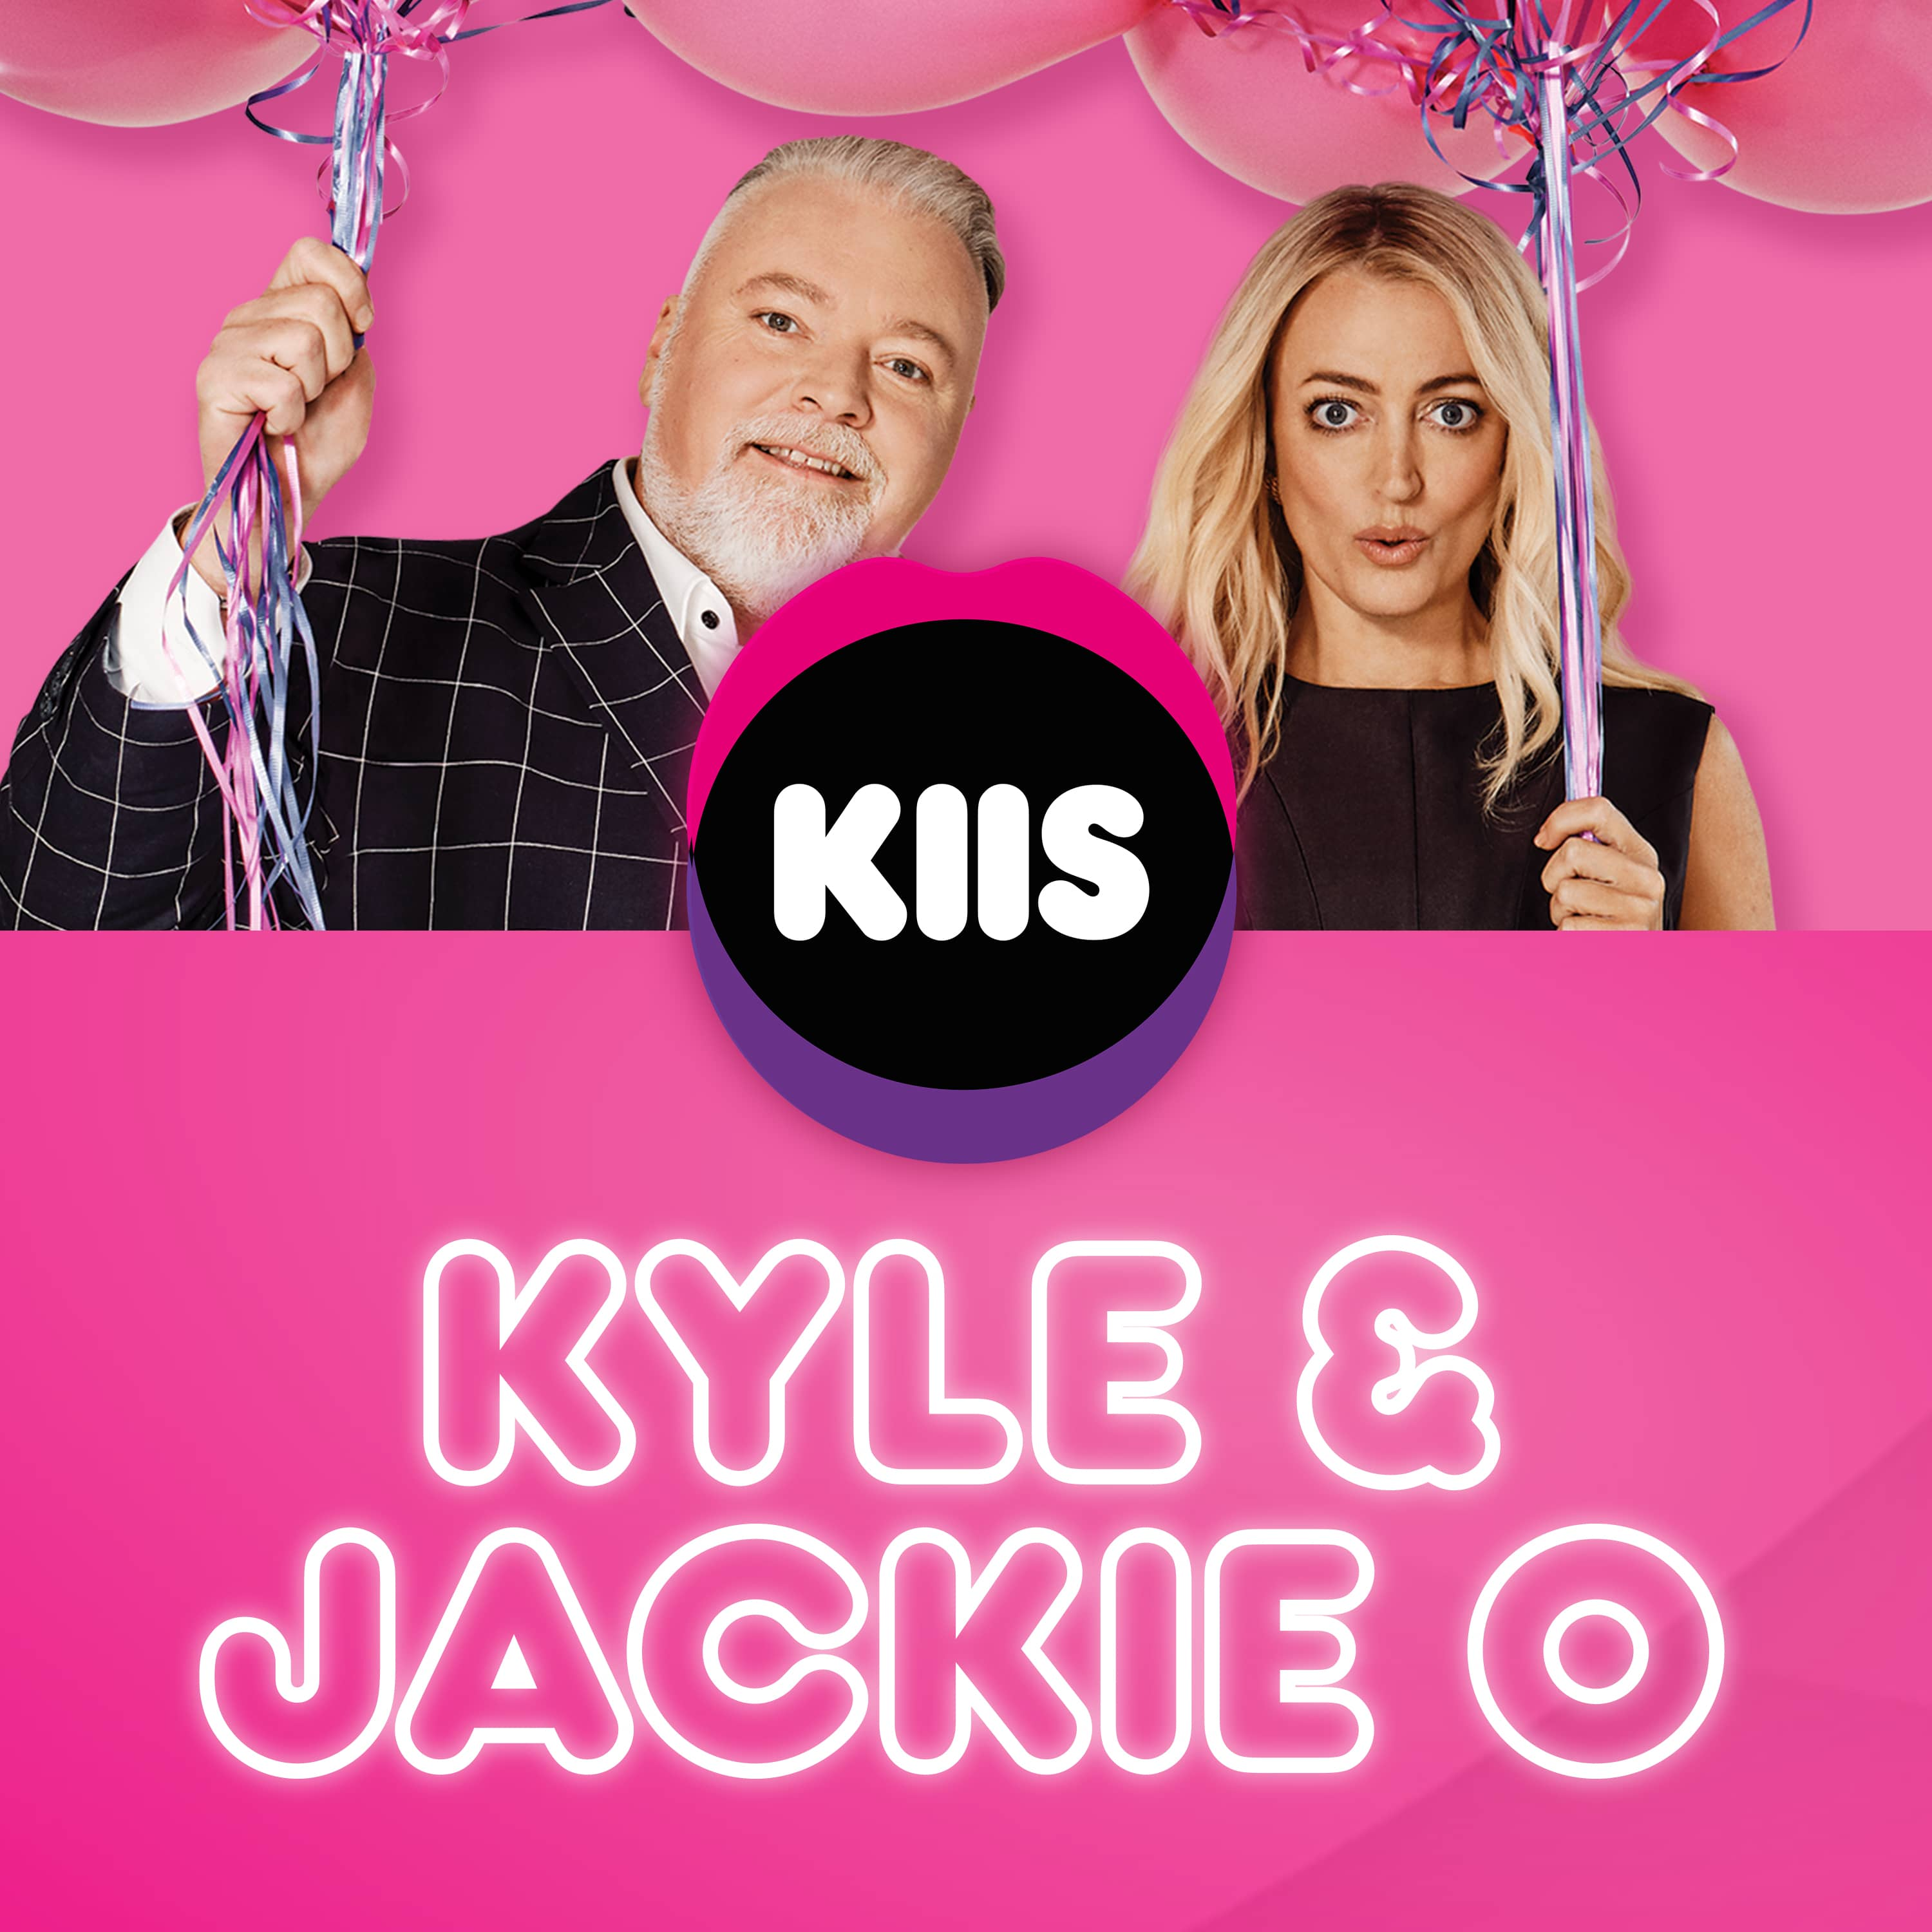 Kyle Answers The Question: When Will Kyle & Jackie O Start In Melbourne?